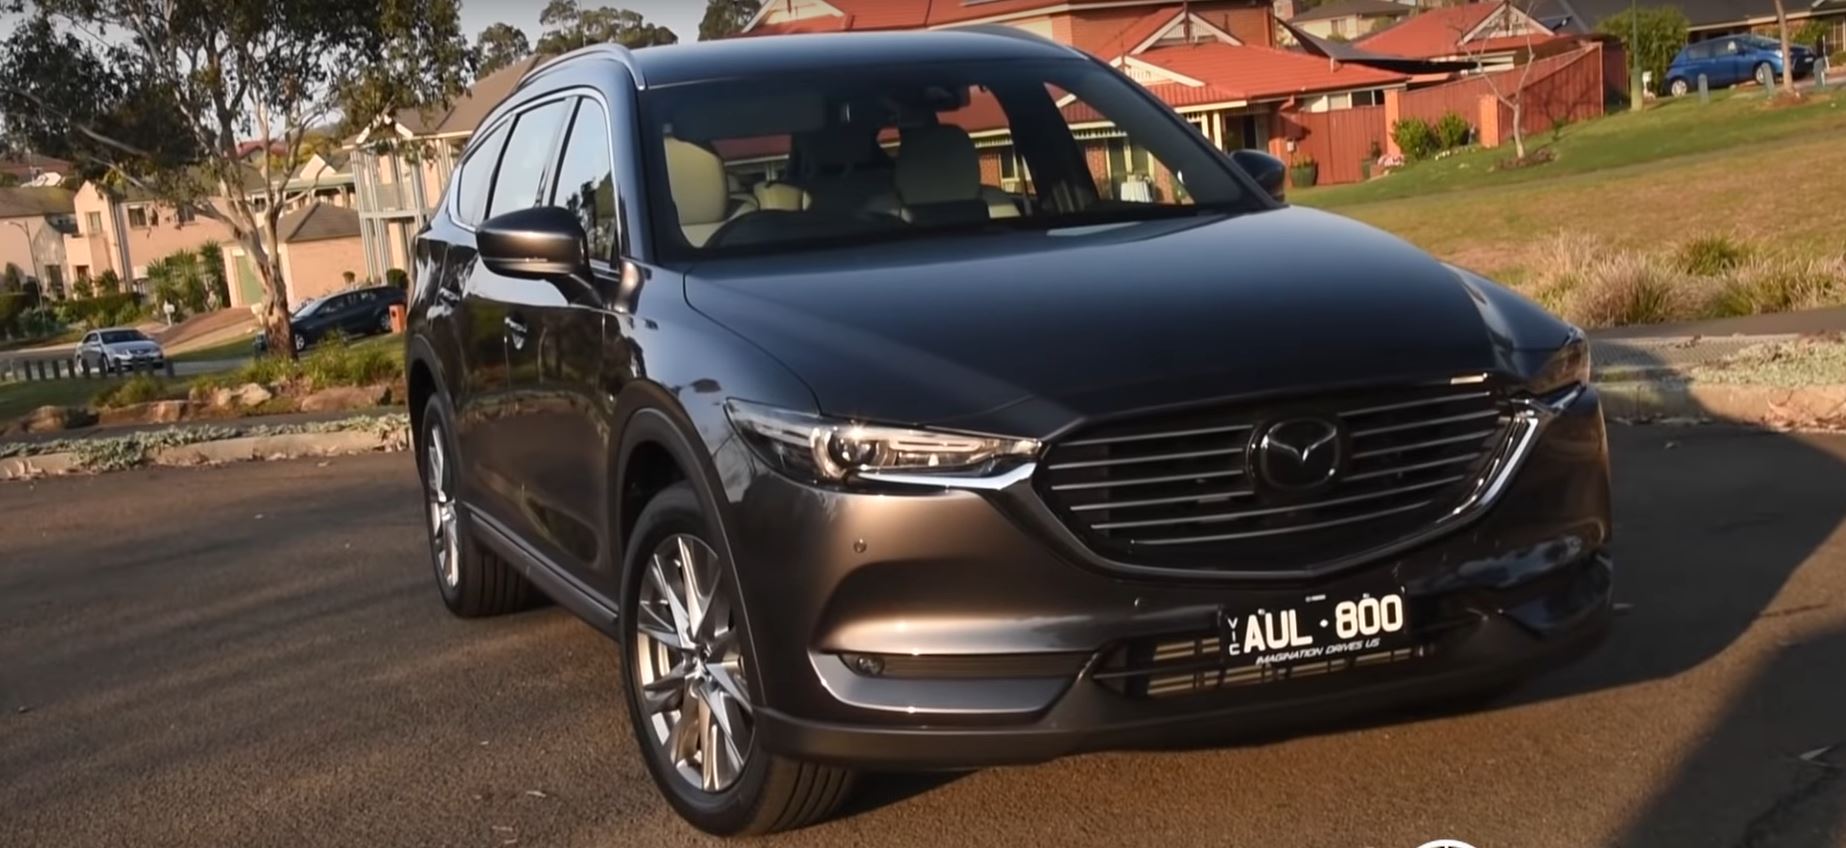 190 Hp Mazda Cx 8 With 2 2 Liter Diesel Does 0 To 100 Km H Test Autoevolution